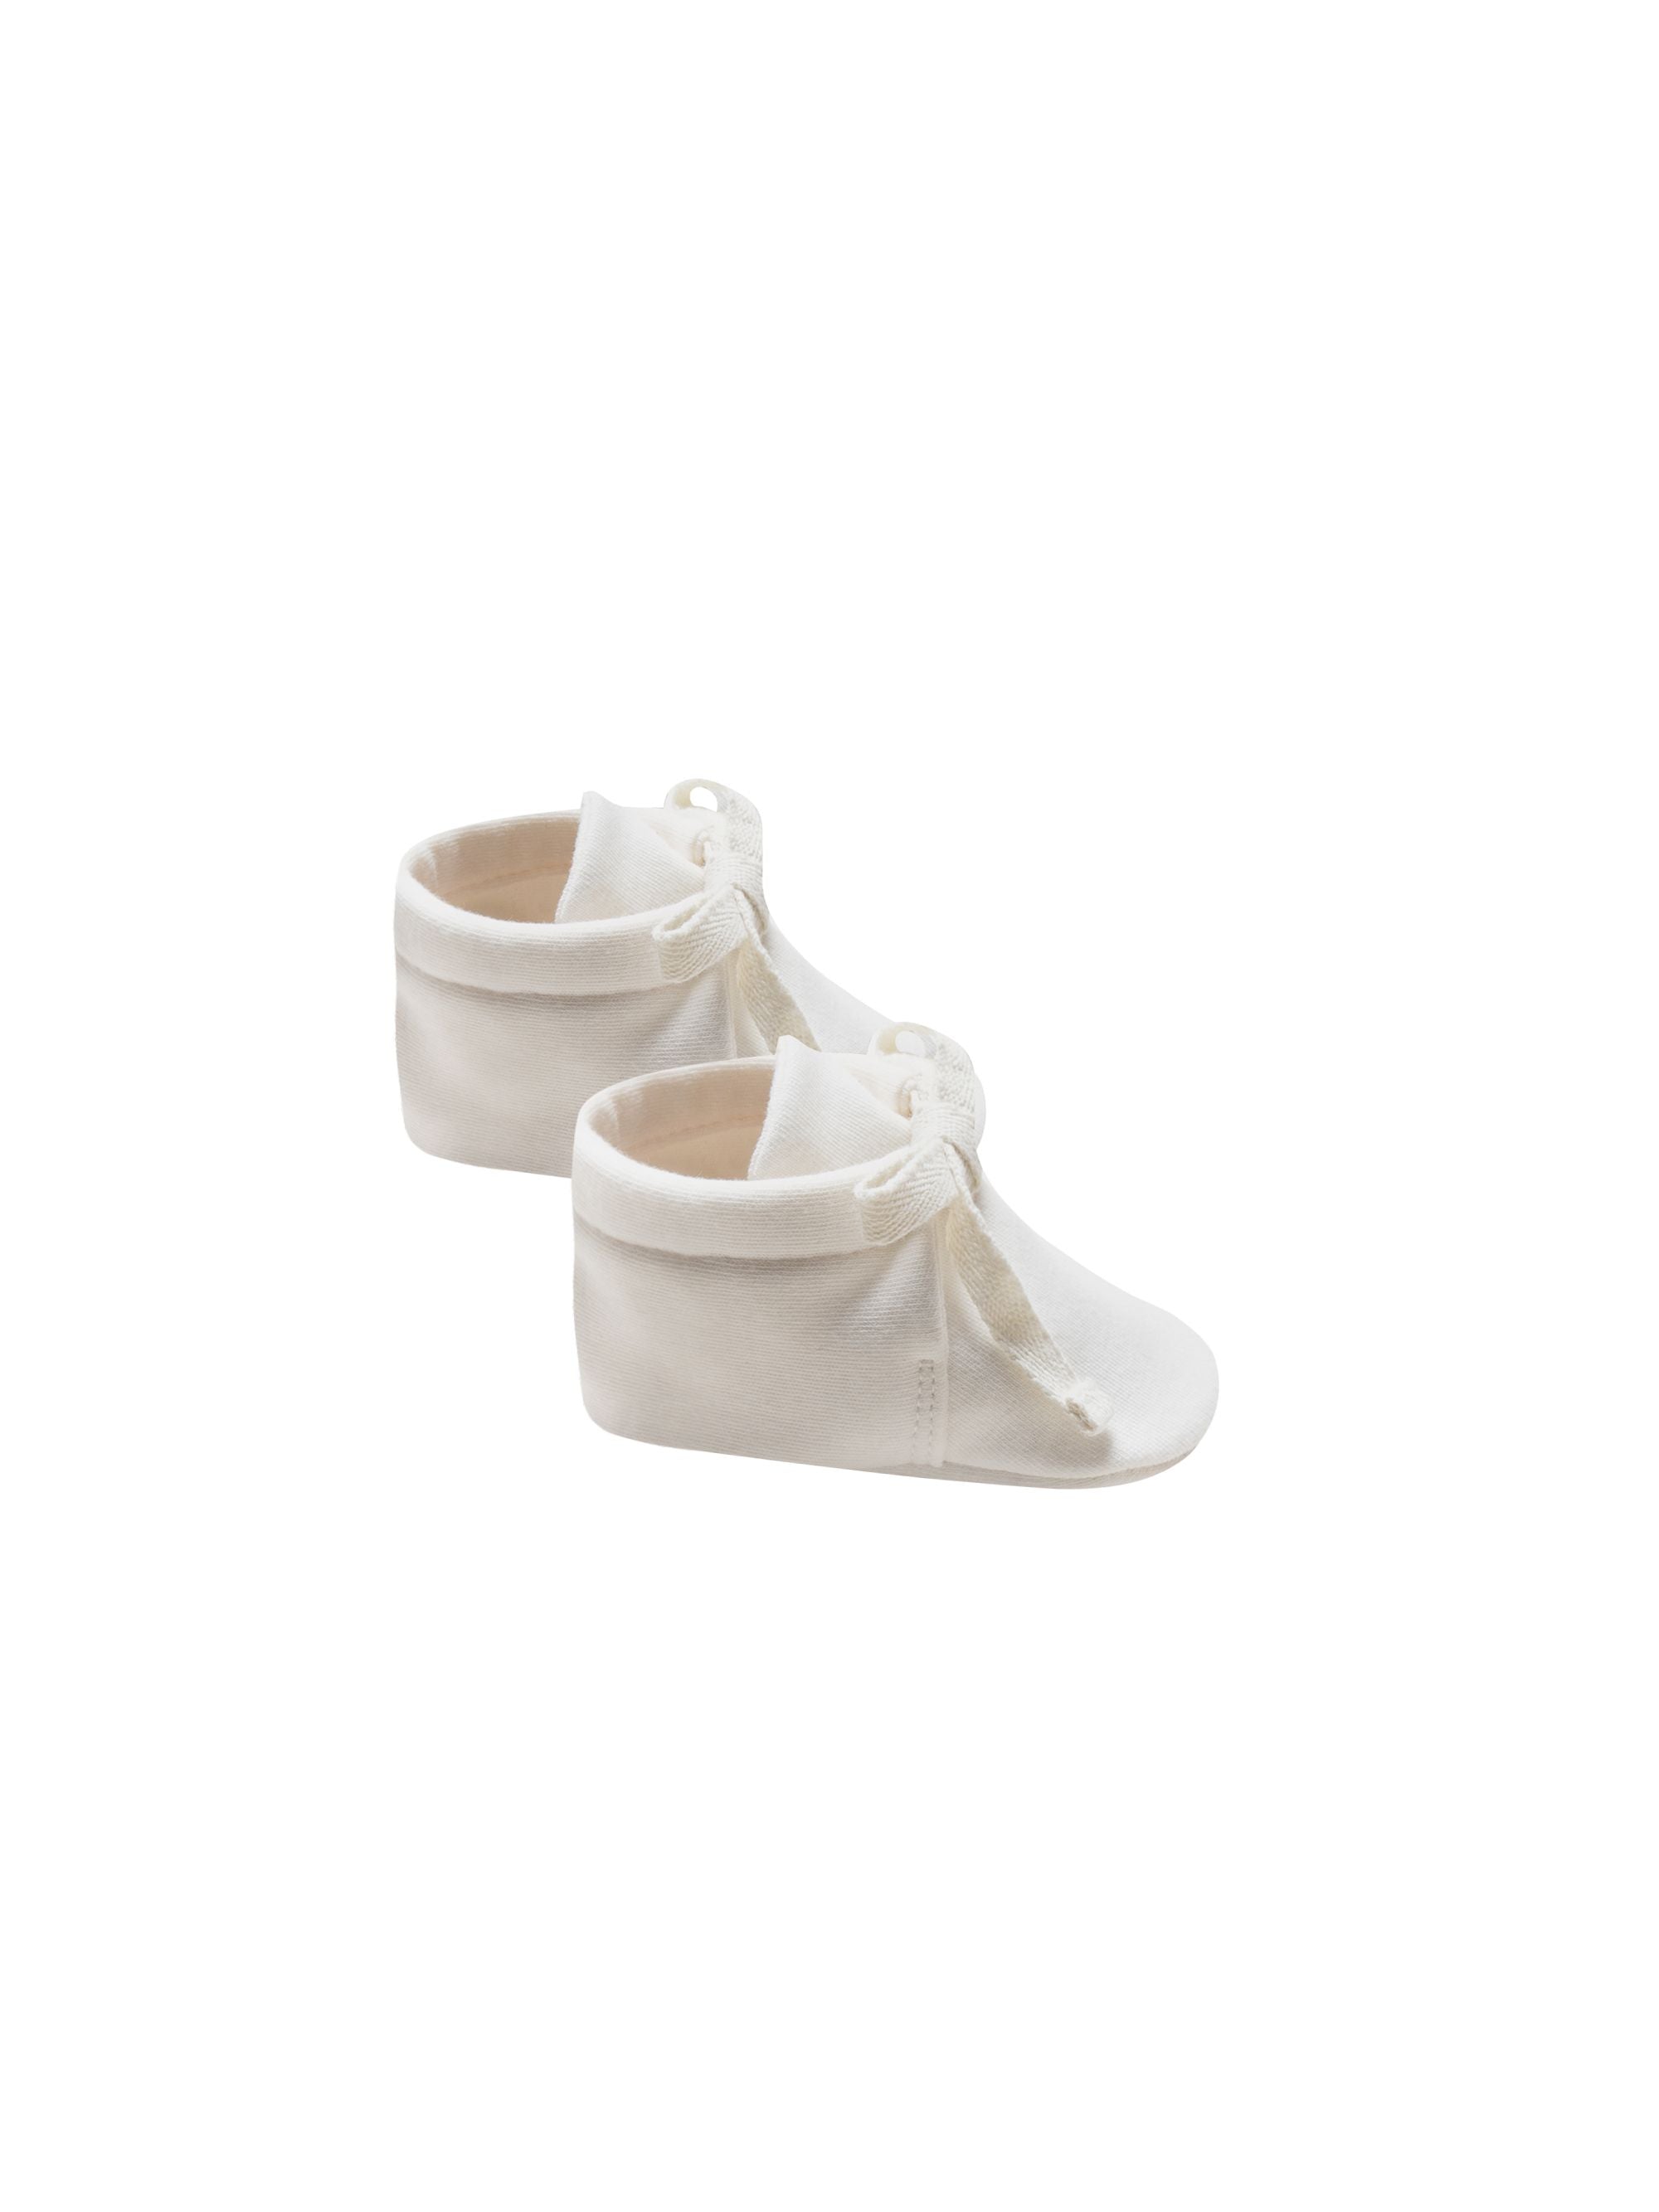 baby booties - ivory